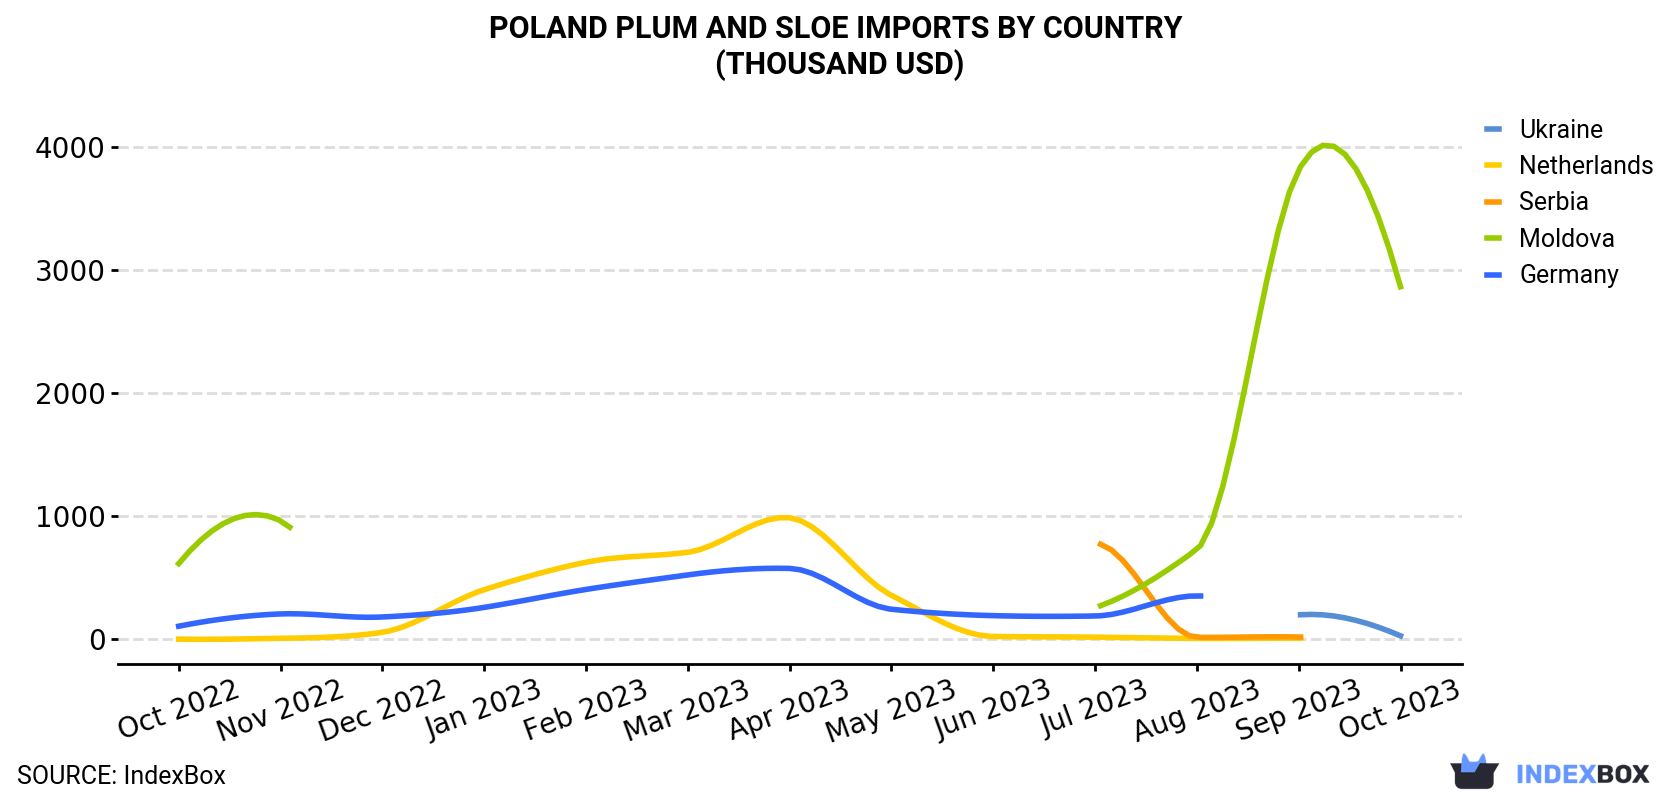 Poland Plum And Sloe Imports By Country (Thousand USD)